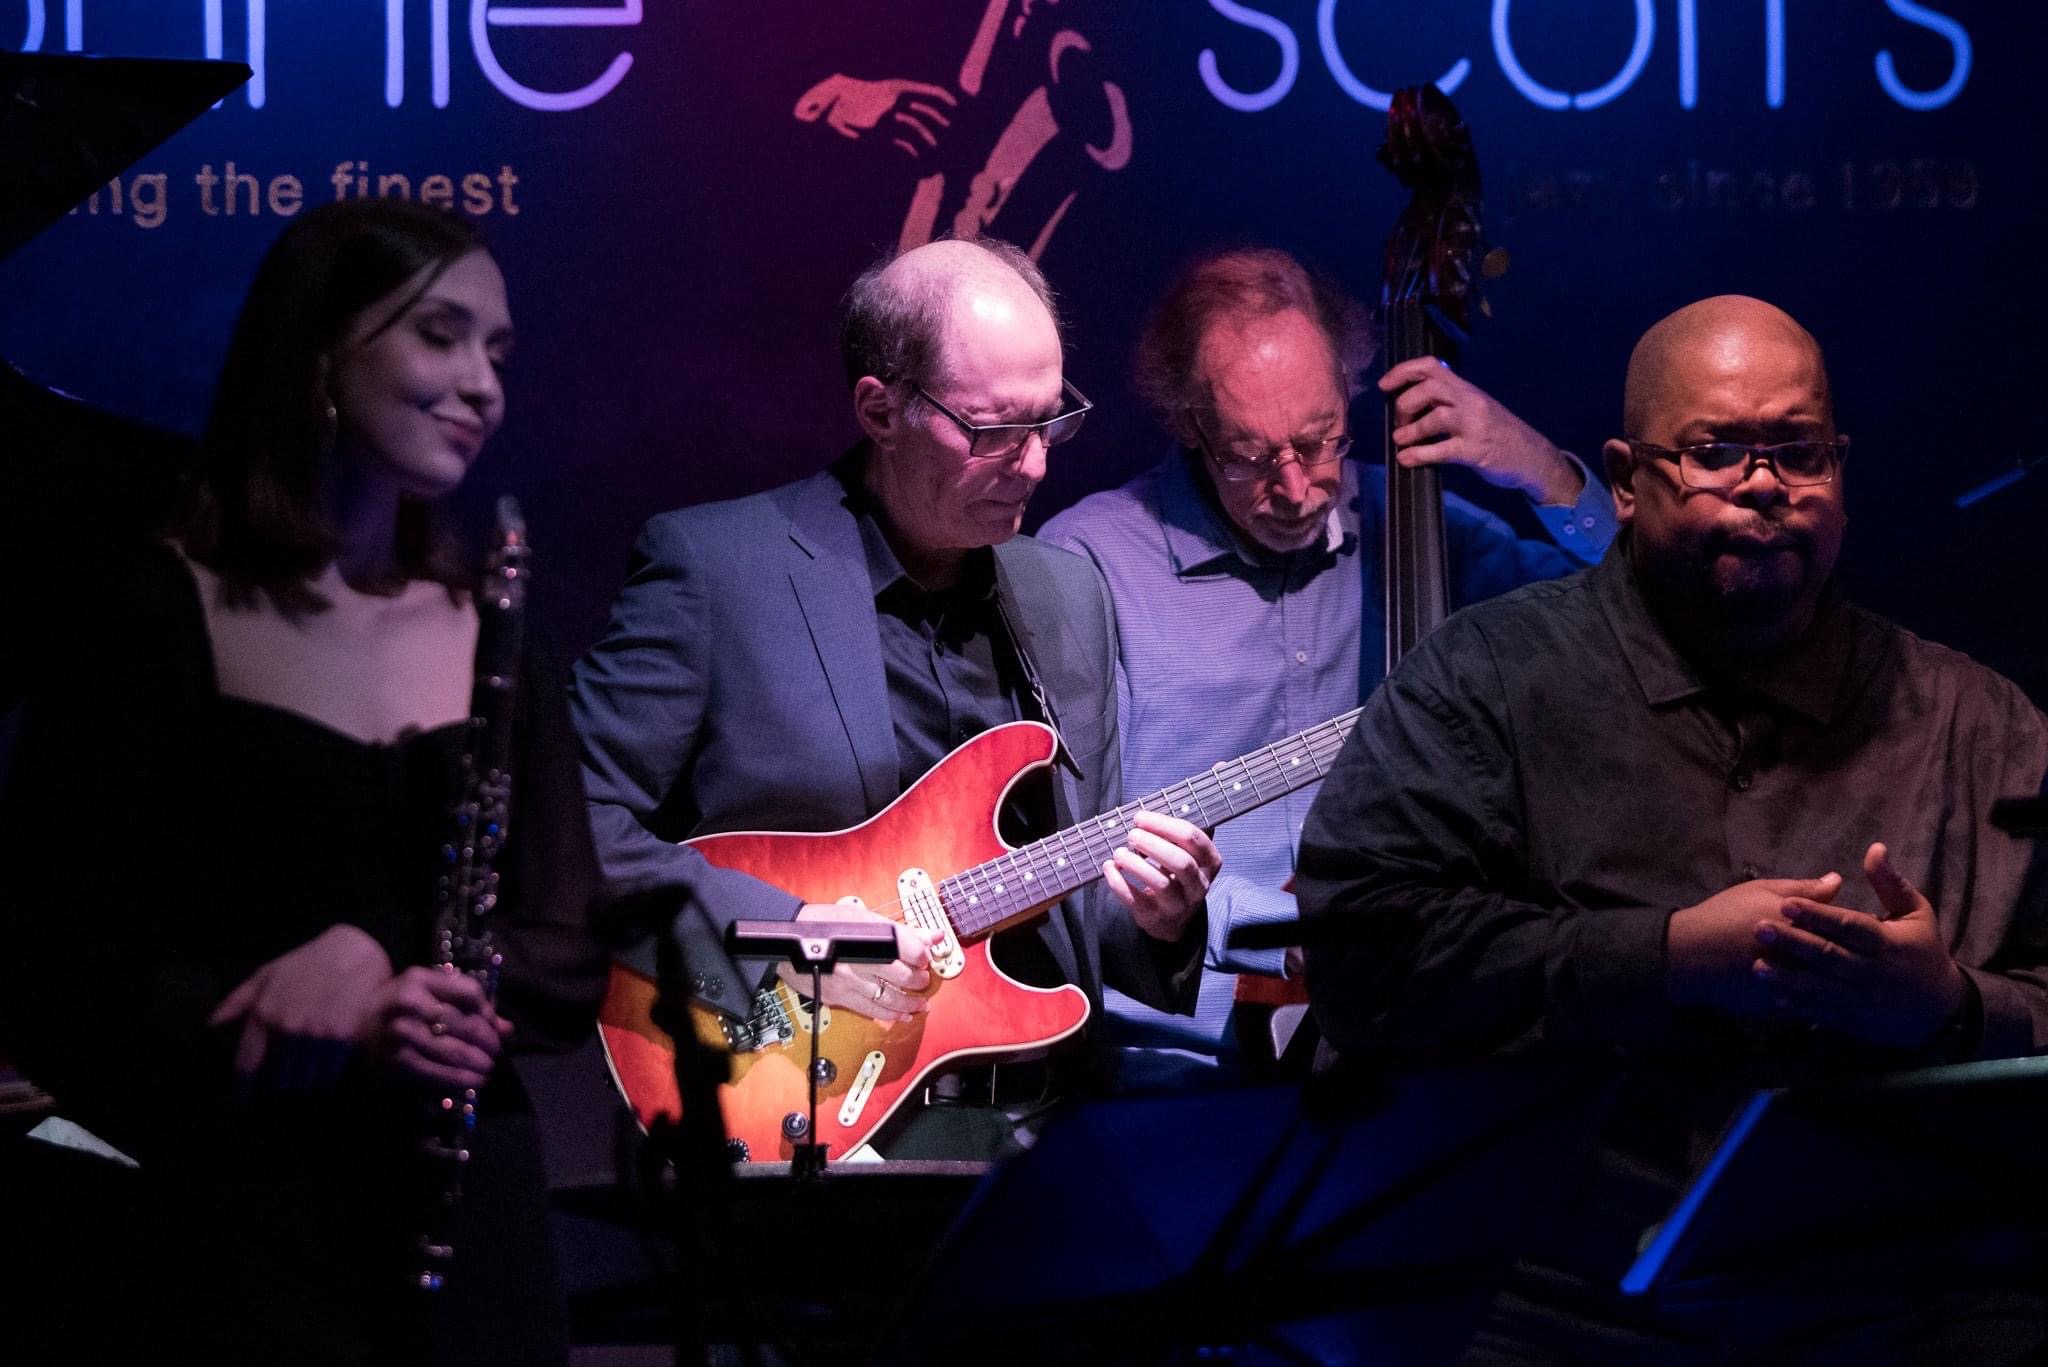 Canadian Jazz Collective at Ronnie Scott’s in London